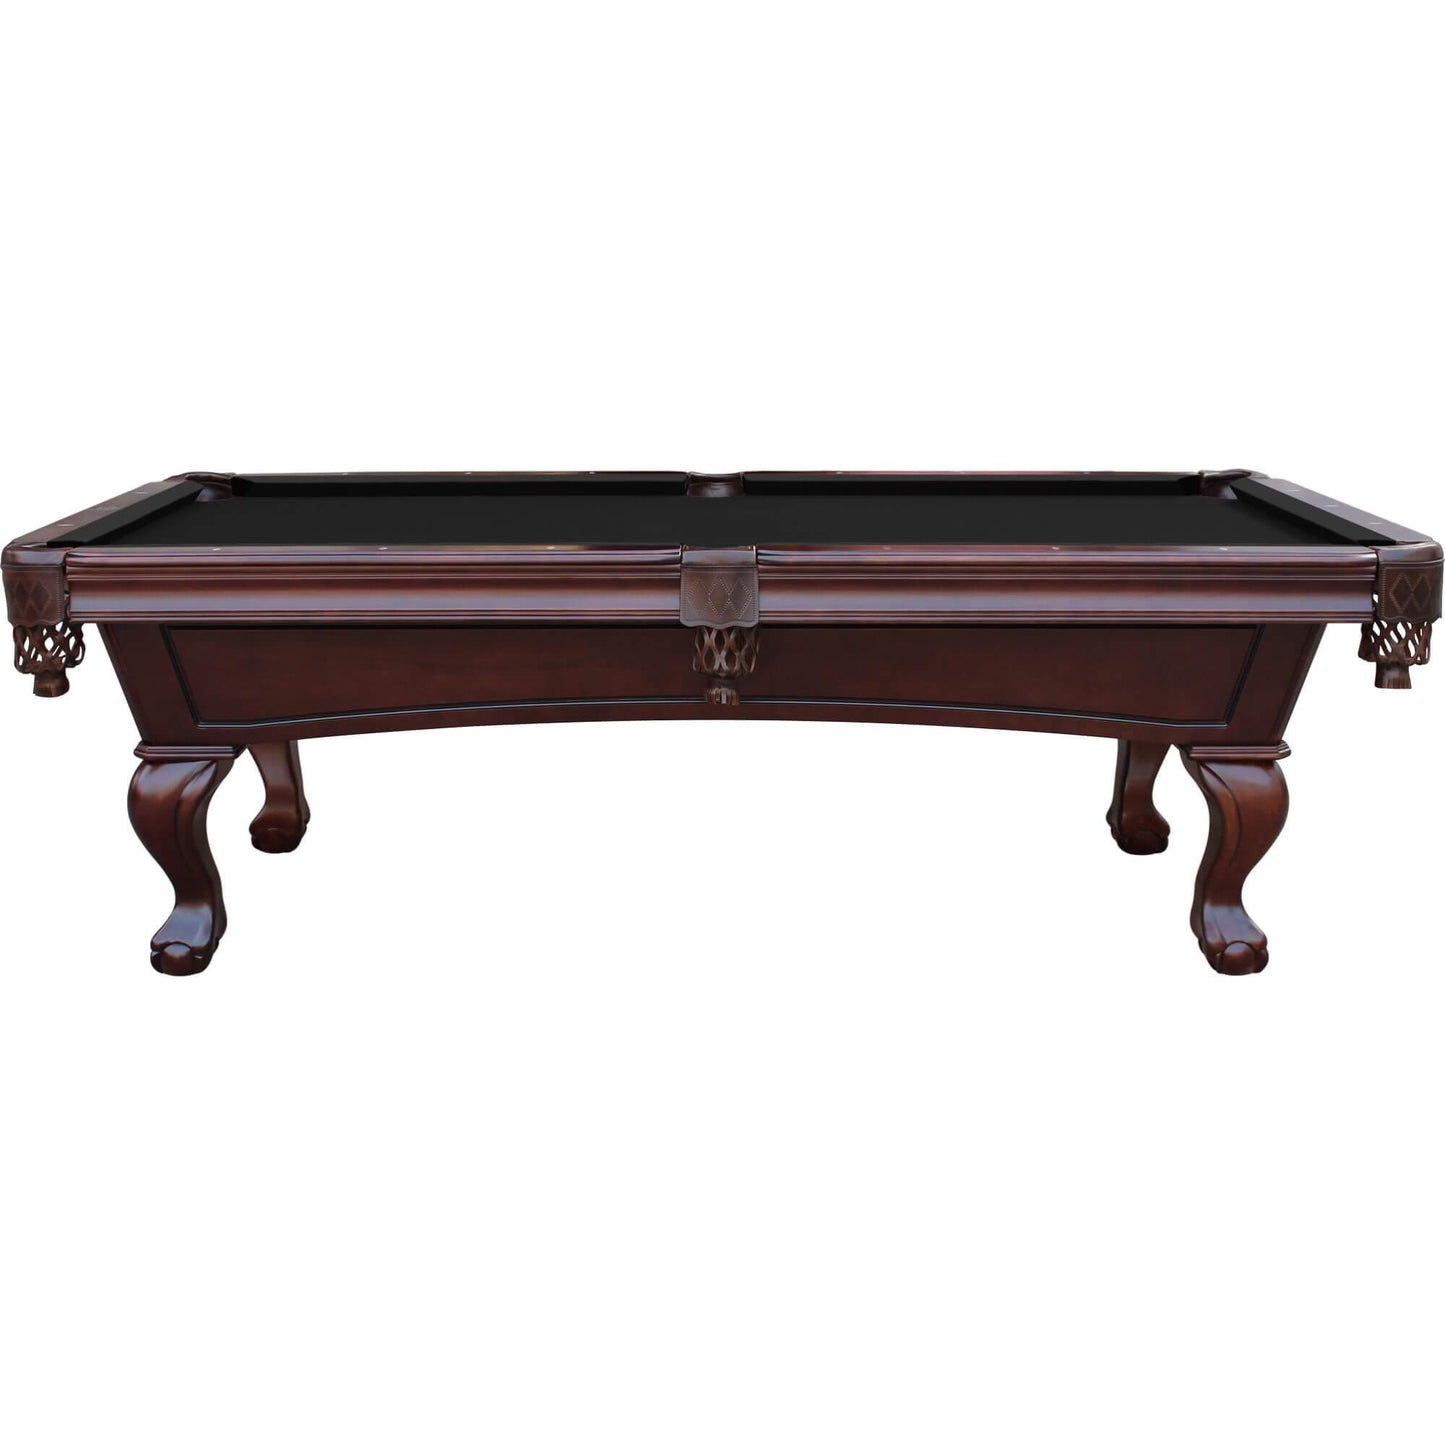 Playcraft Charles River 8' Slate Pool Table with Leather Drop Pockets - Gaming Blaze